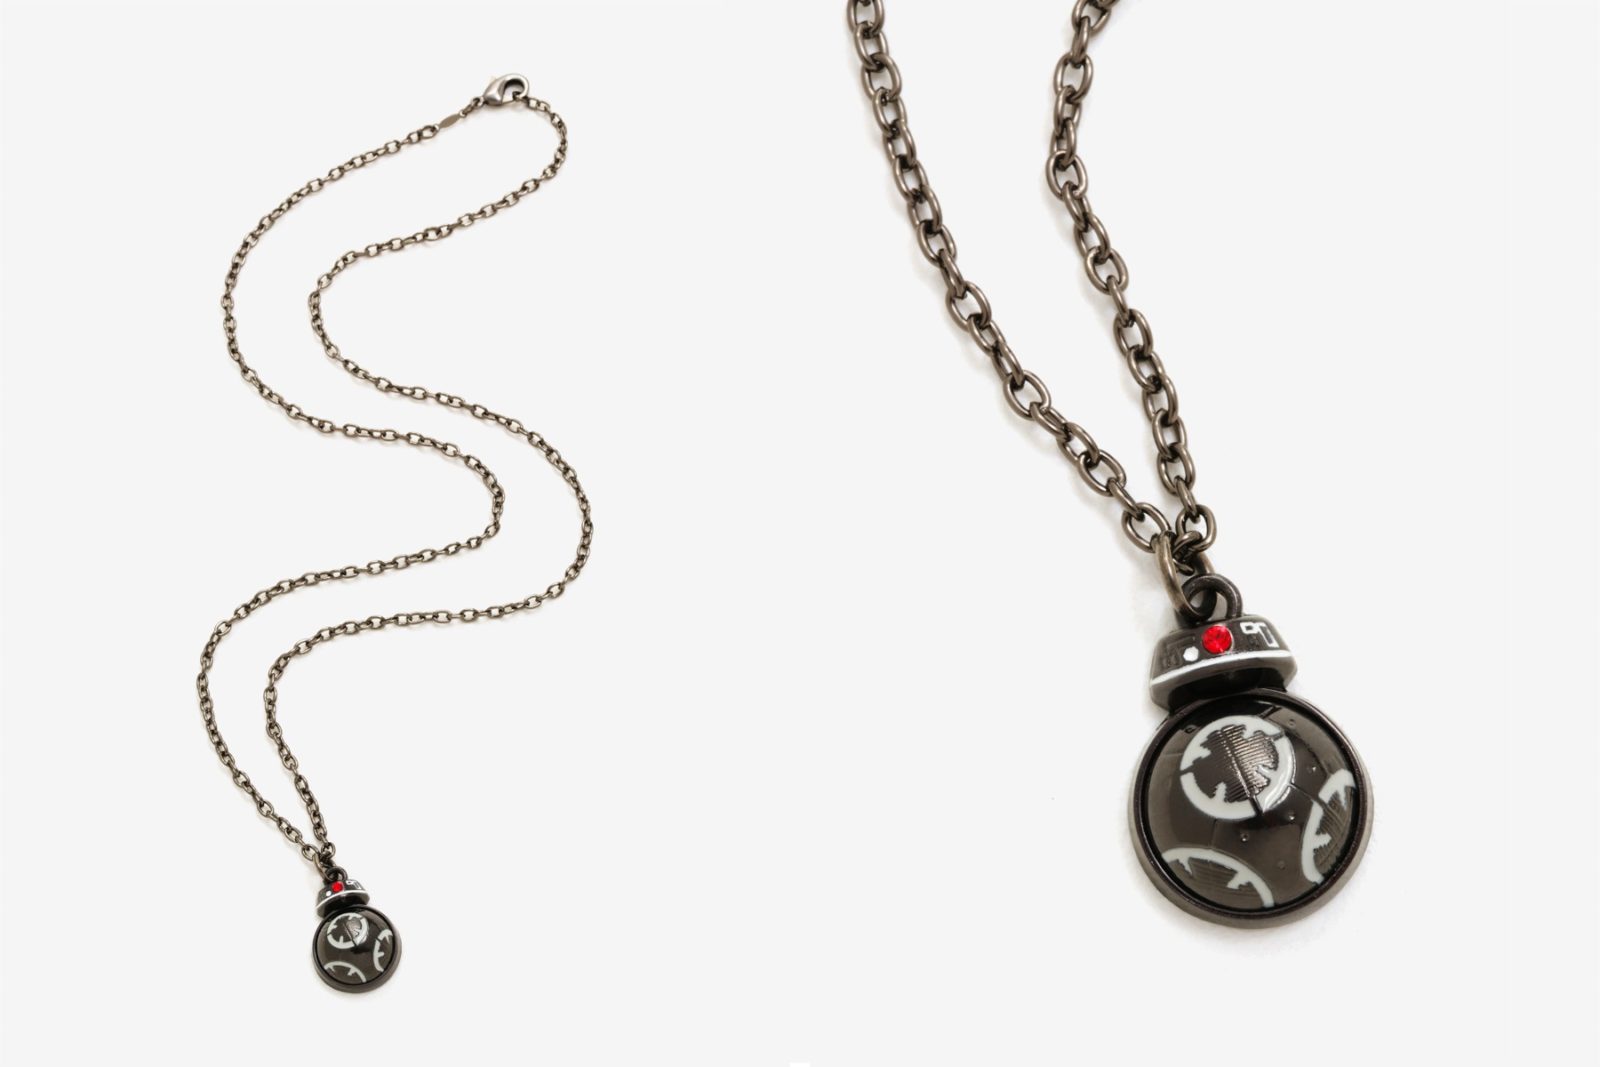 Star Wars The Last Jedi BB-9E swivel necklace available exclusively at Box Lunch